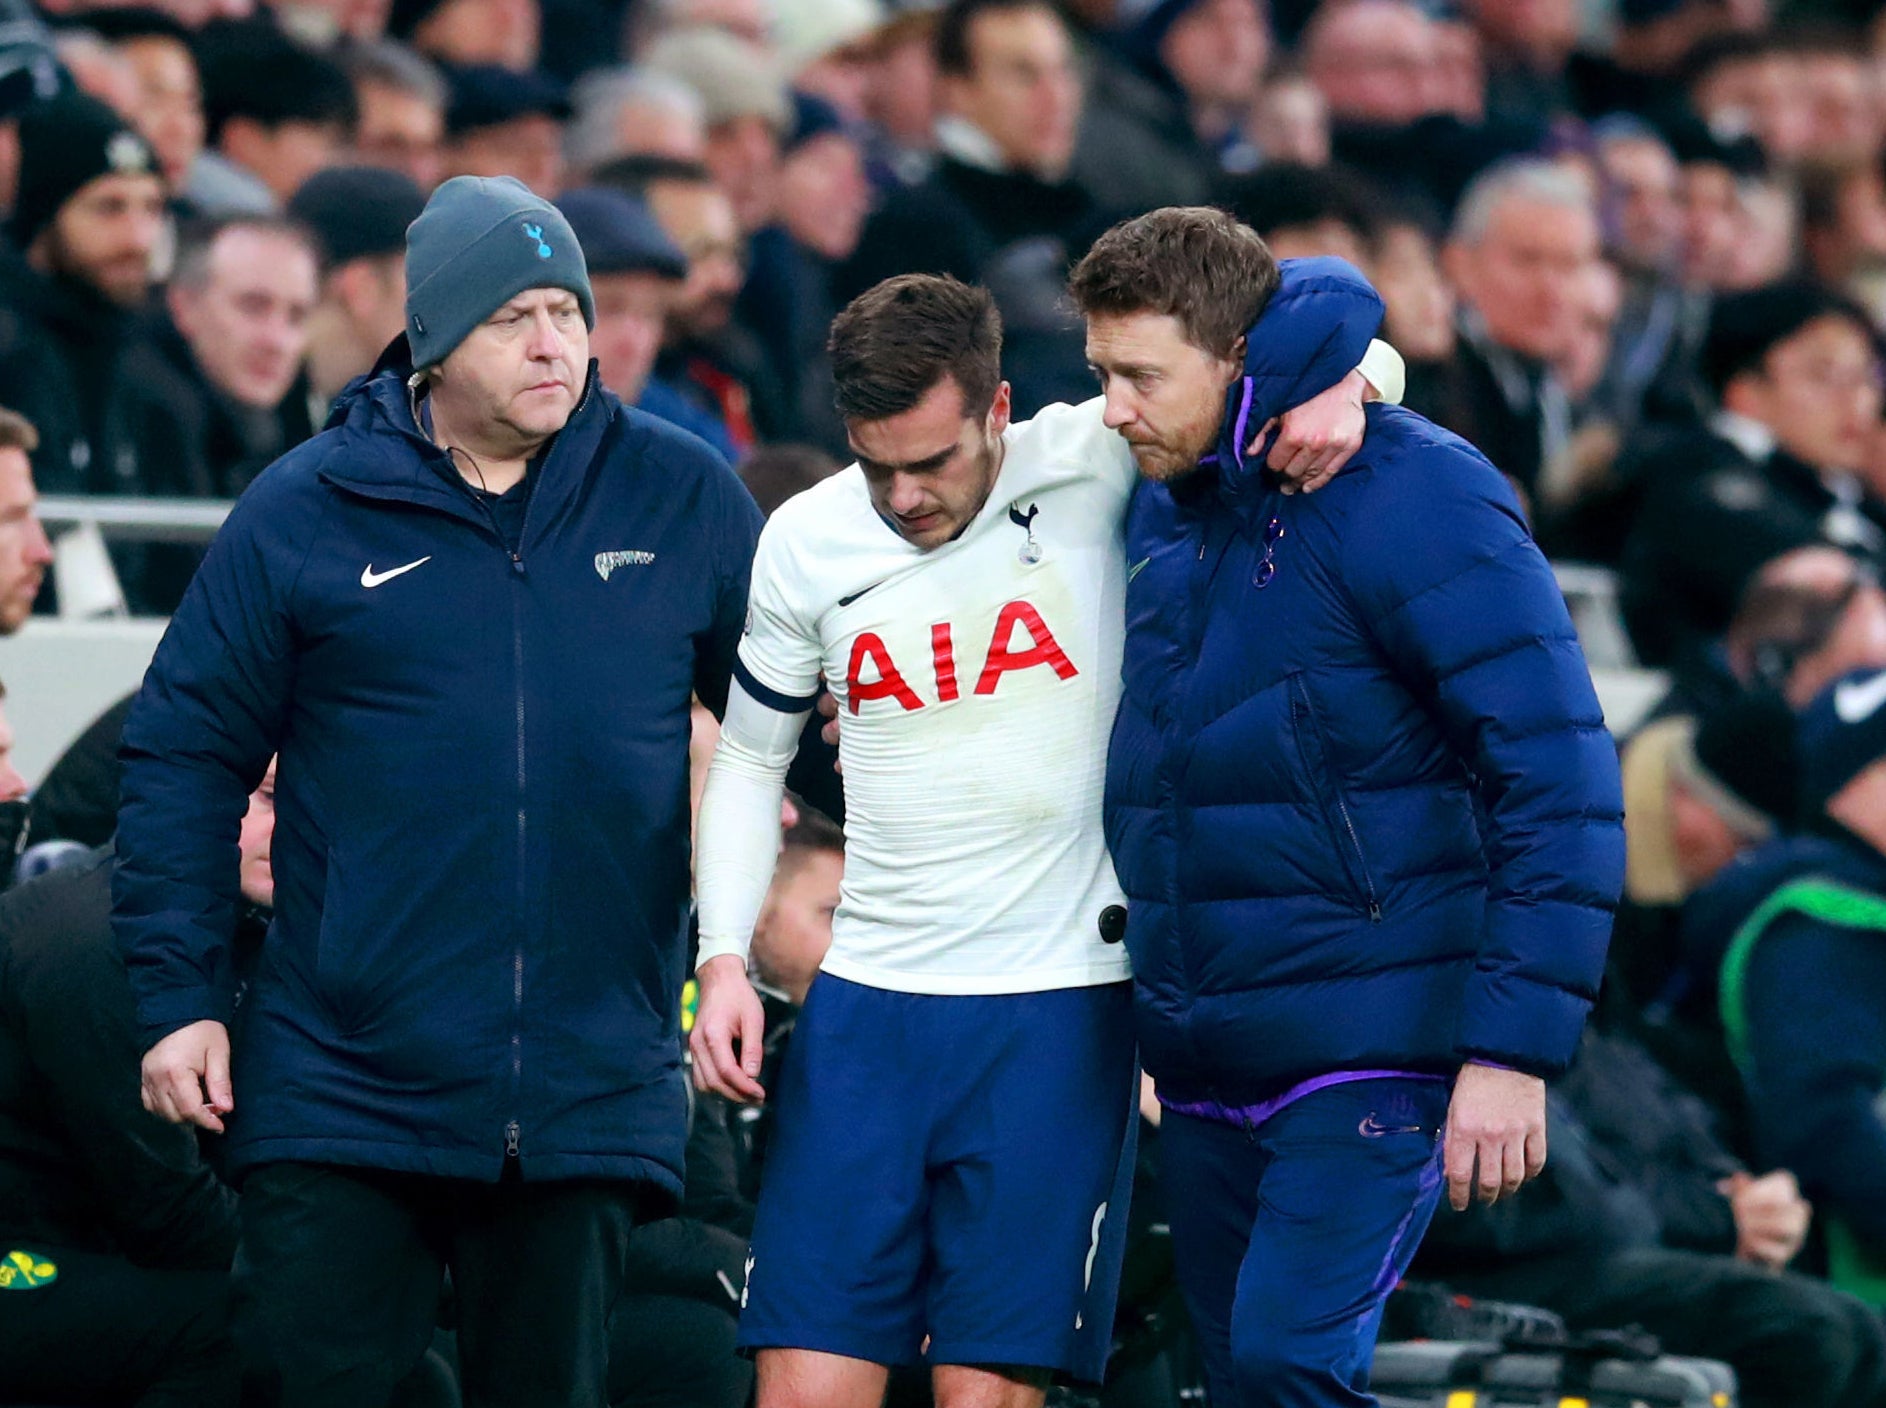 Harry Winks was forced off injured last night